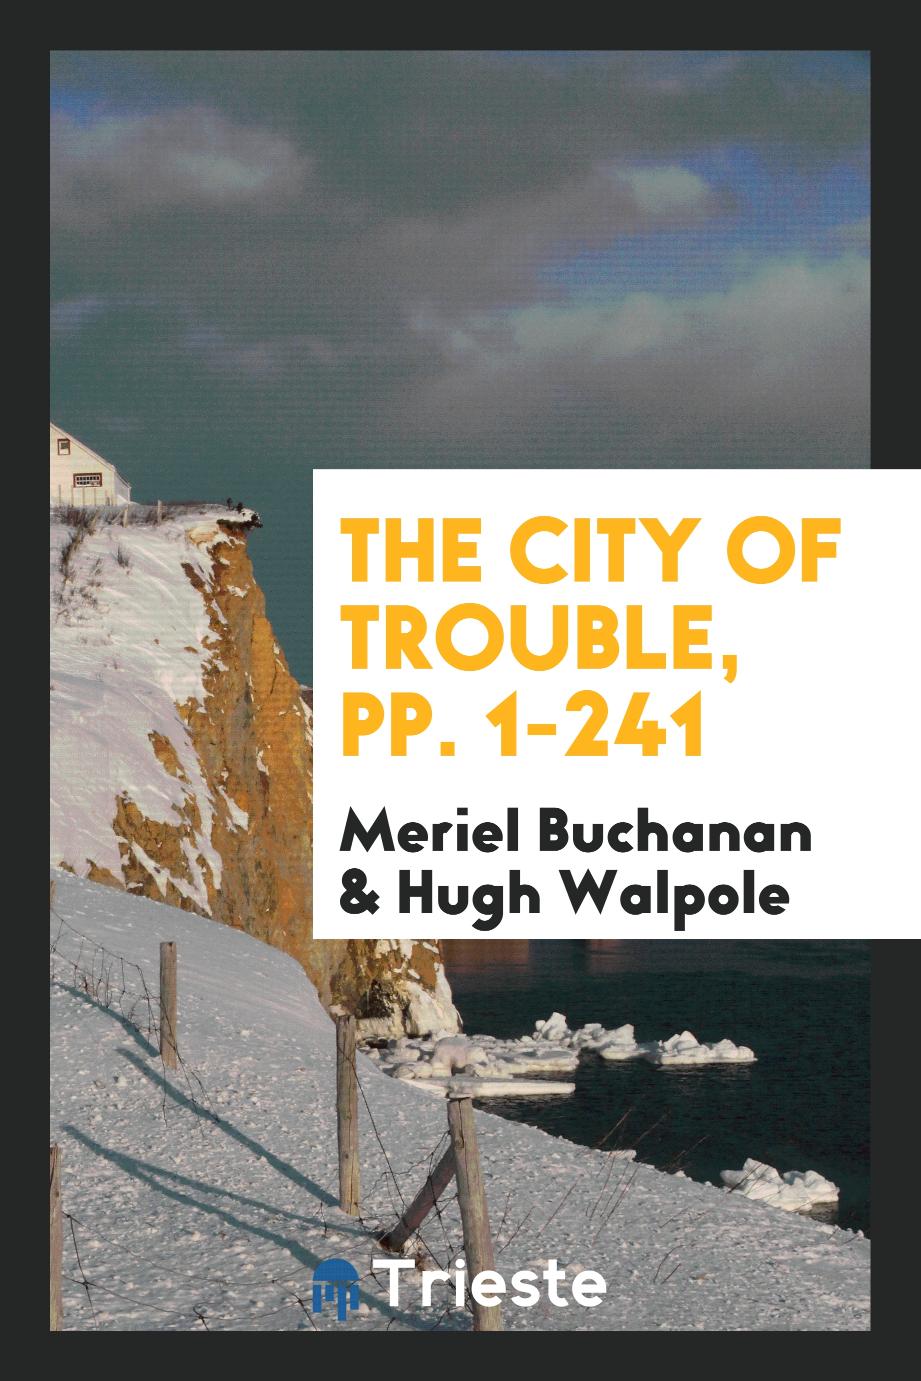 The City of Trouble, pp. 1-241